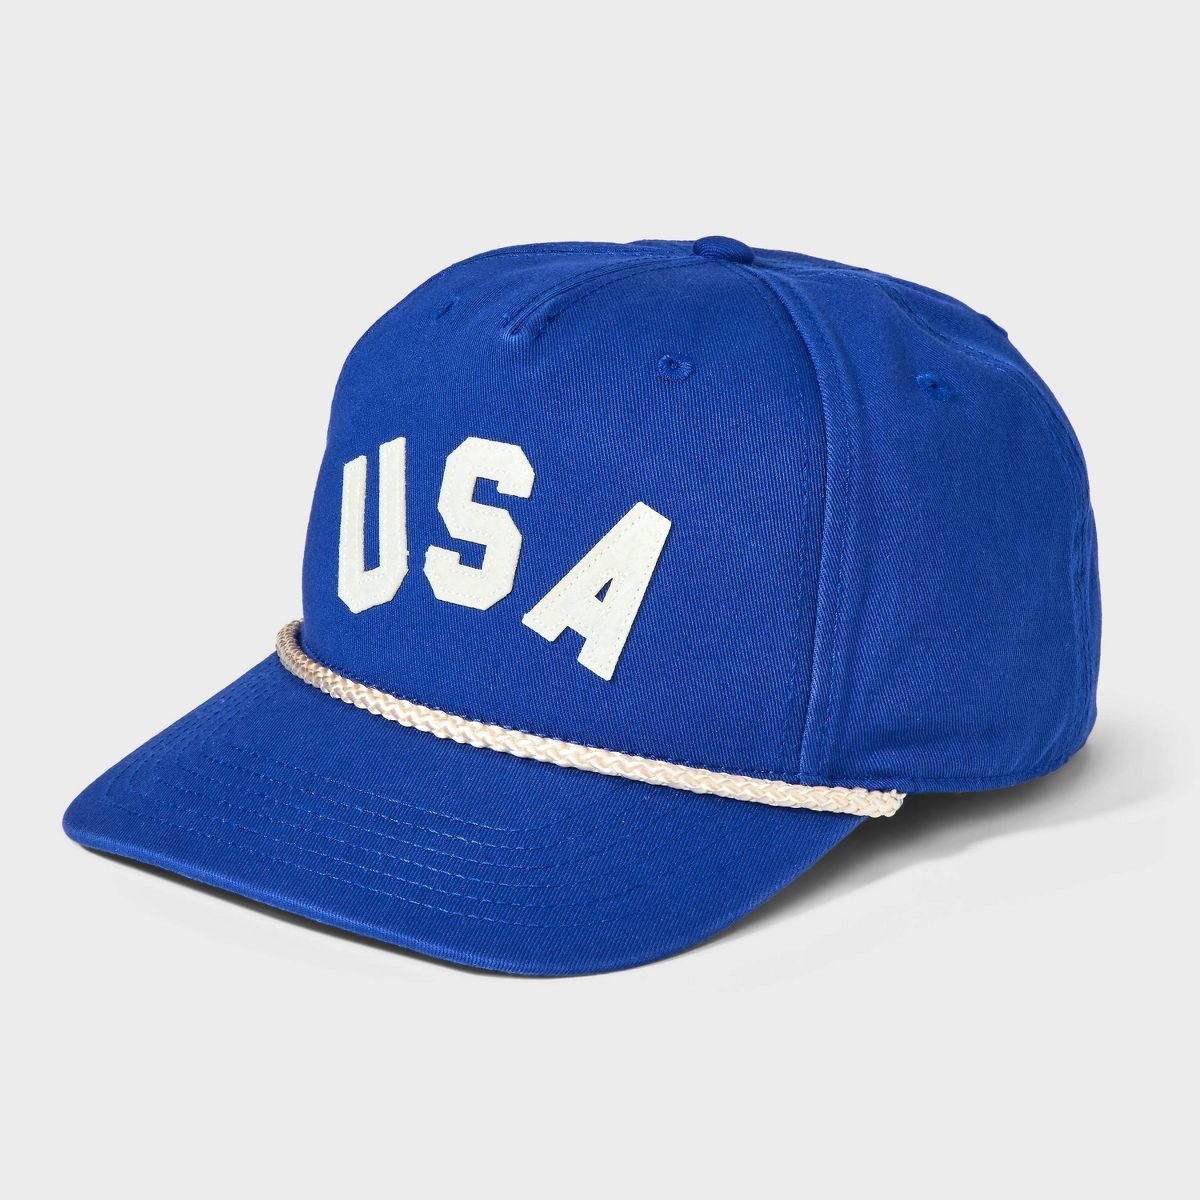 USA Baseball Hat with Rope Detail - Mighty Fine Navy Blue | Target